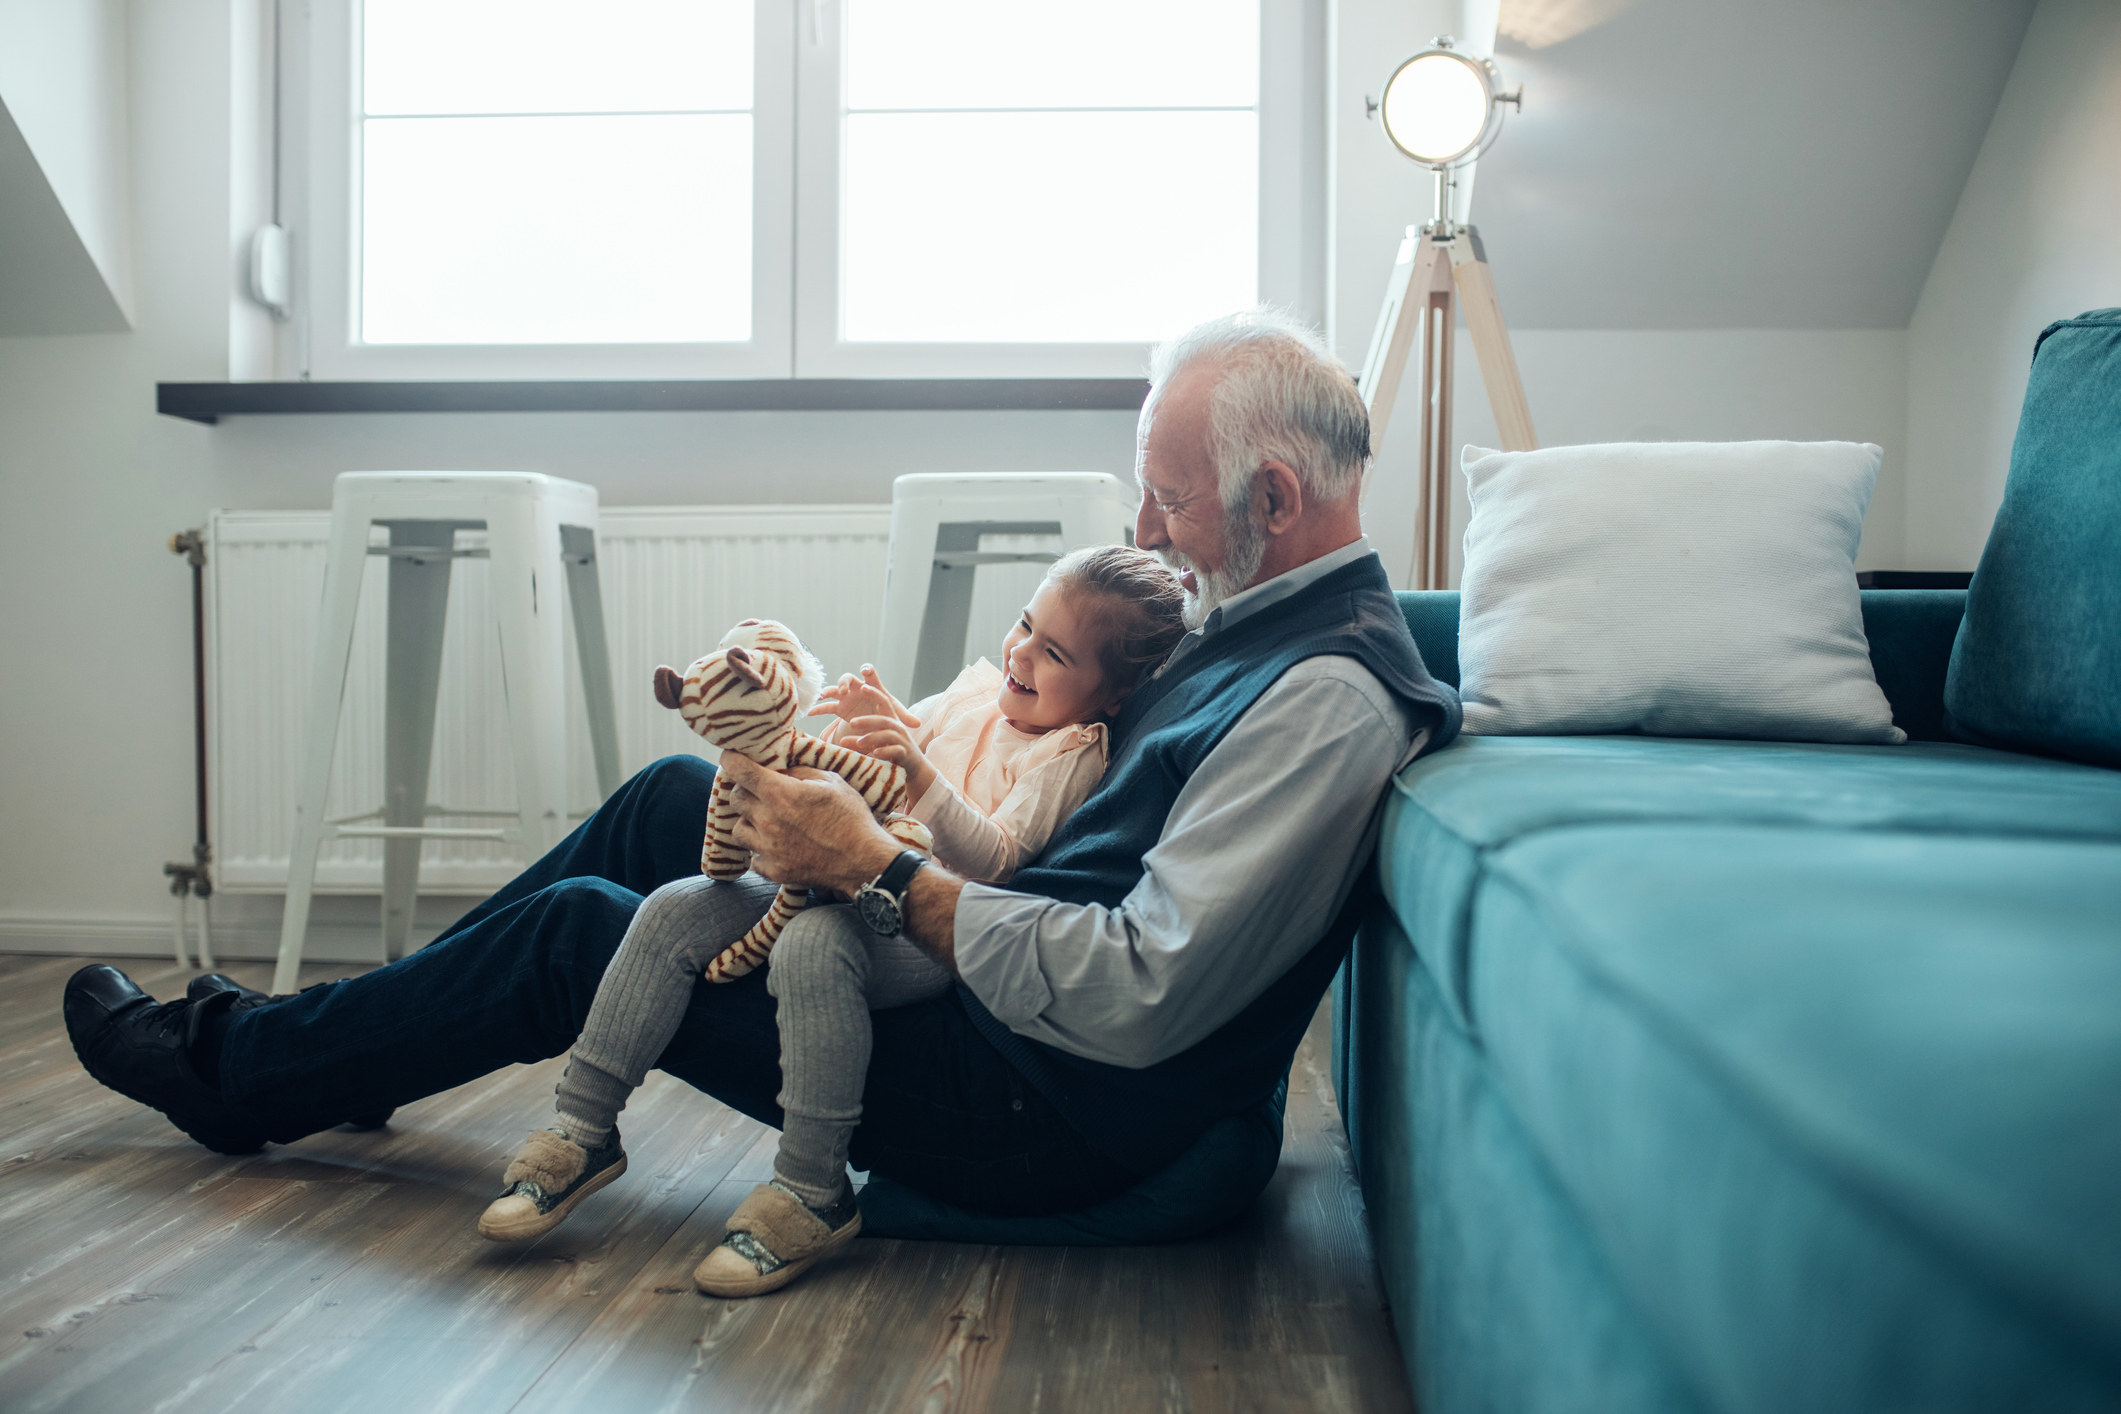 A grandfather holding his granddaughter while they play with a stuffed toy